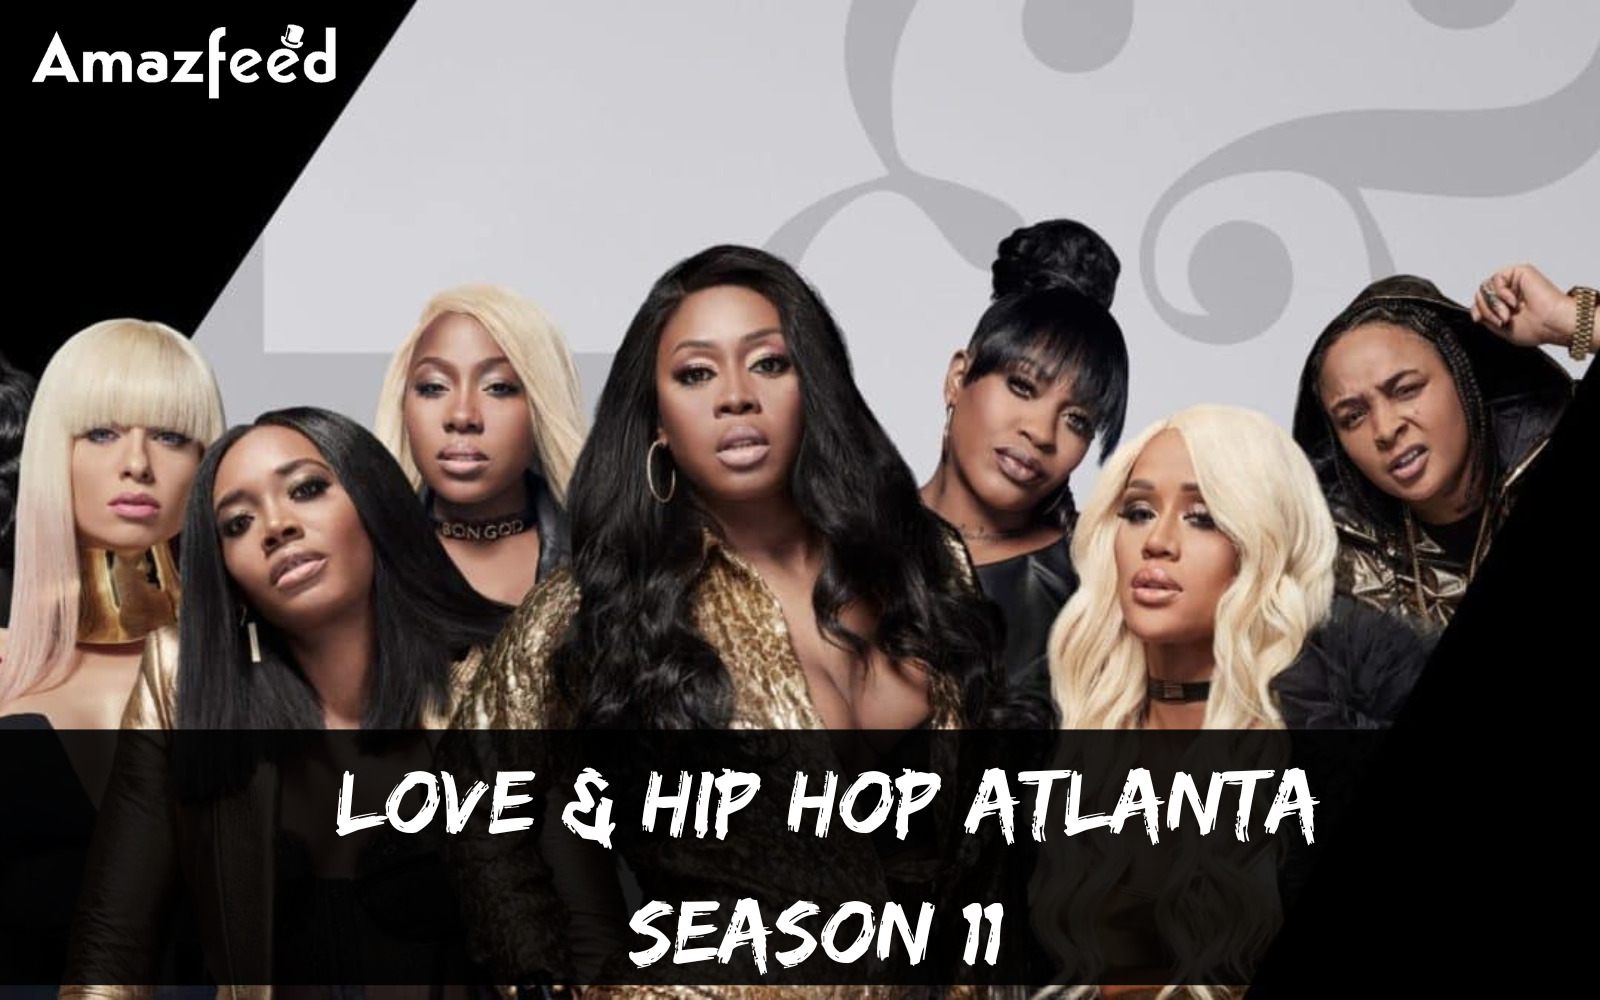 When Is Love & Hip Hop Atlanta season 11 Coming Out (Release Date)